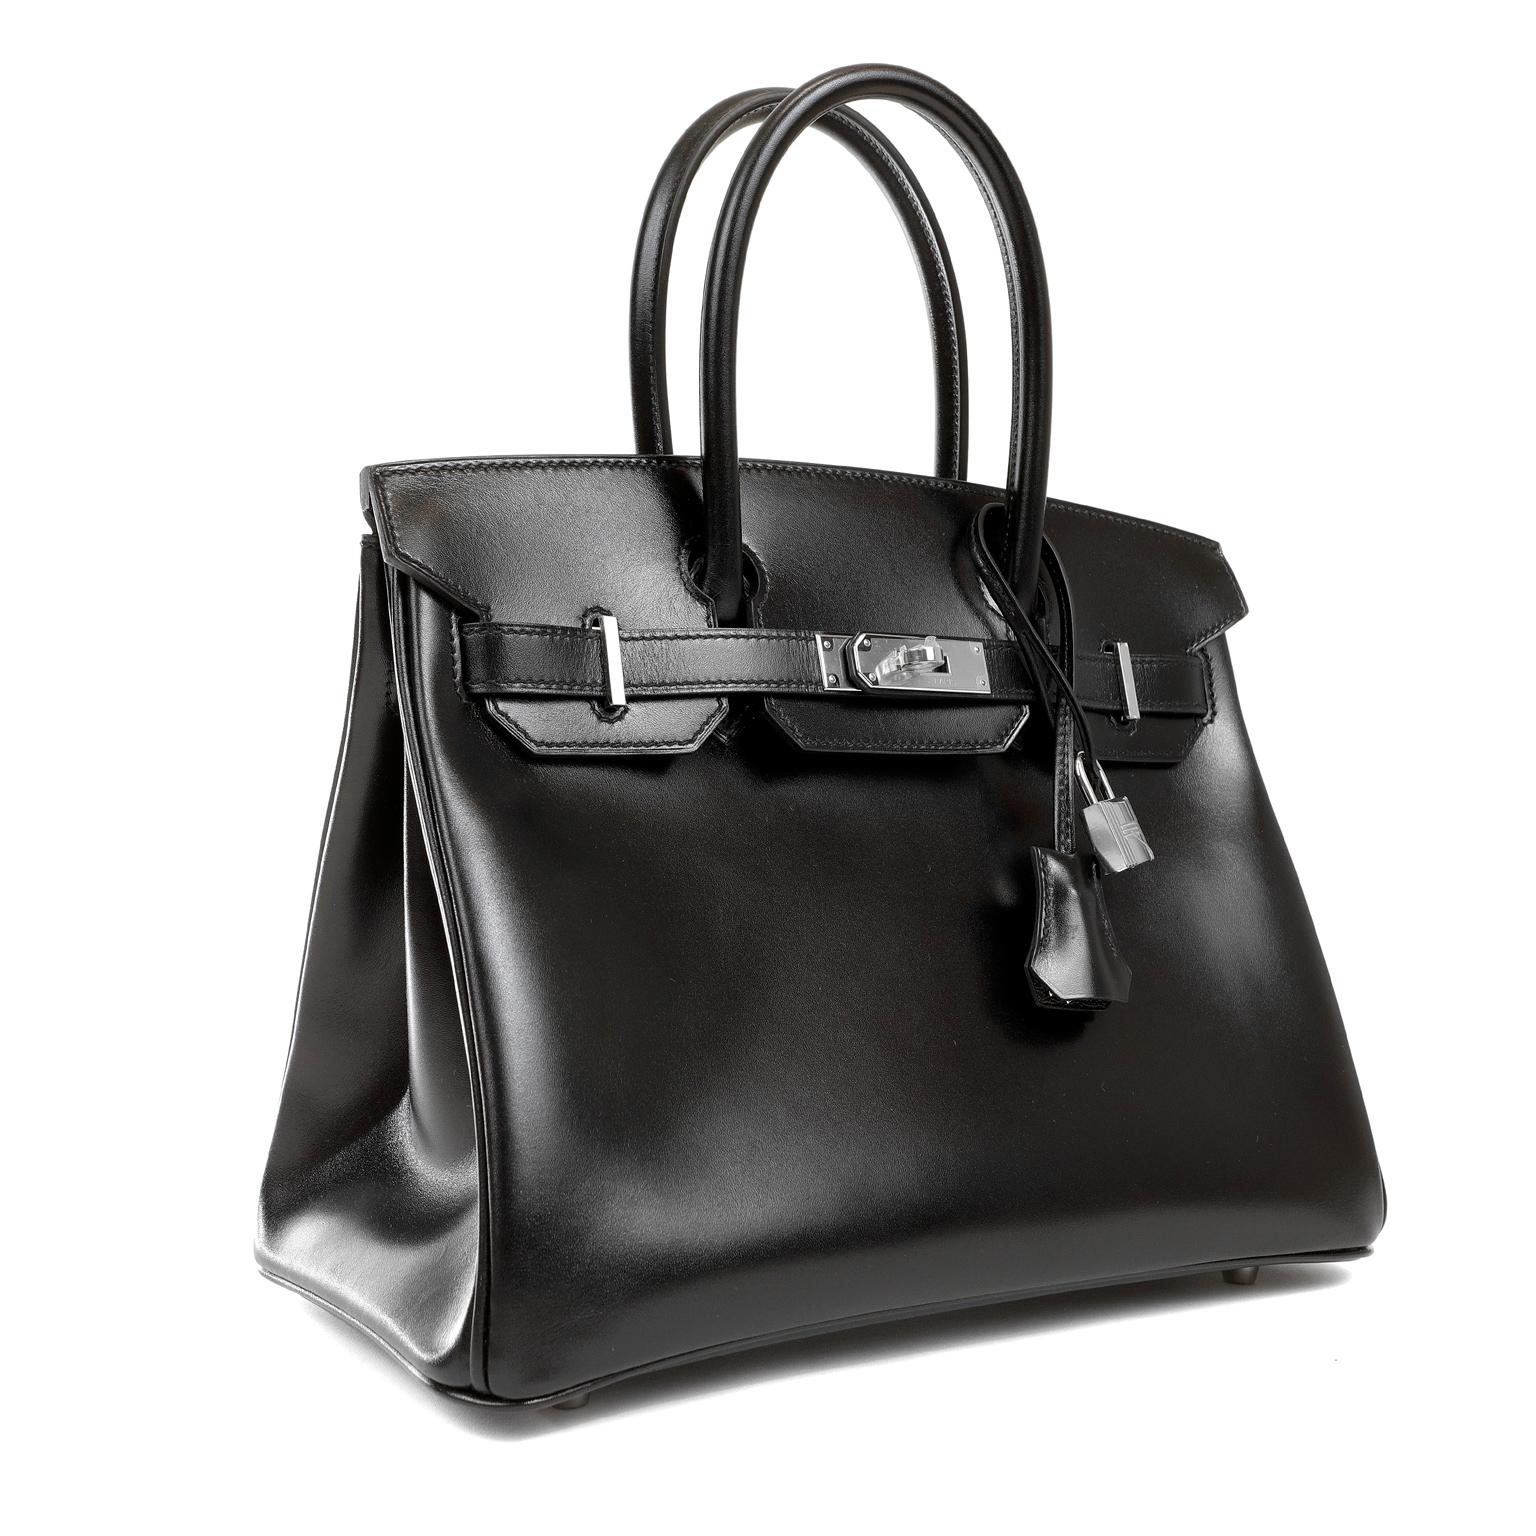 This authentic Hermès Black Box Calf 30 cm Birkin is in pristine unworn condition with the protective plastic intact on the hardware. Each Hermès piece is sewn by hand and waitlists often exceed a year. The highly sought after Birkin is a rare find